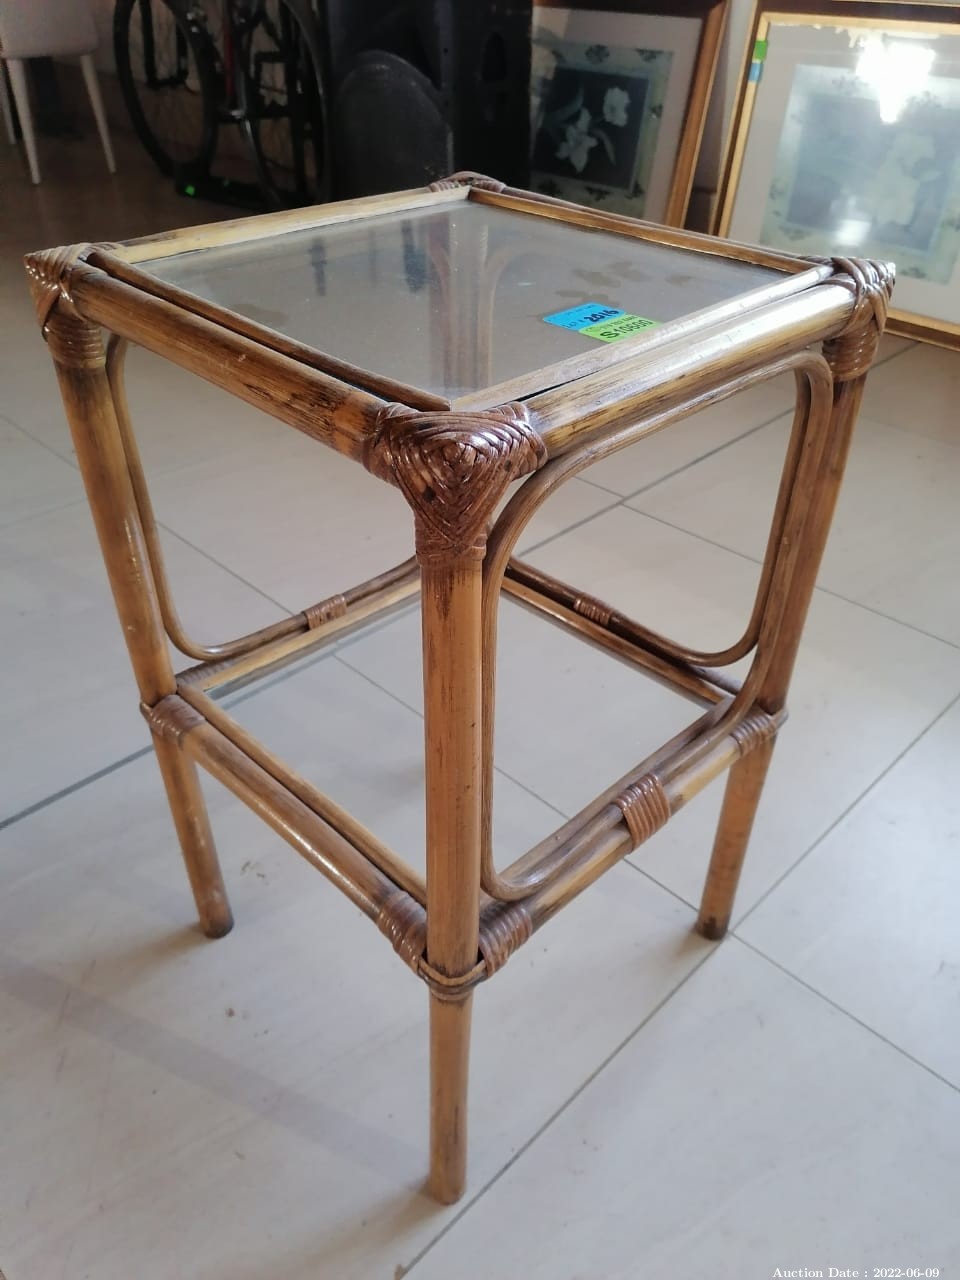 2016 - 1 x Cane & Glass Side Table